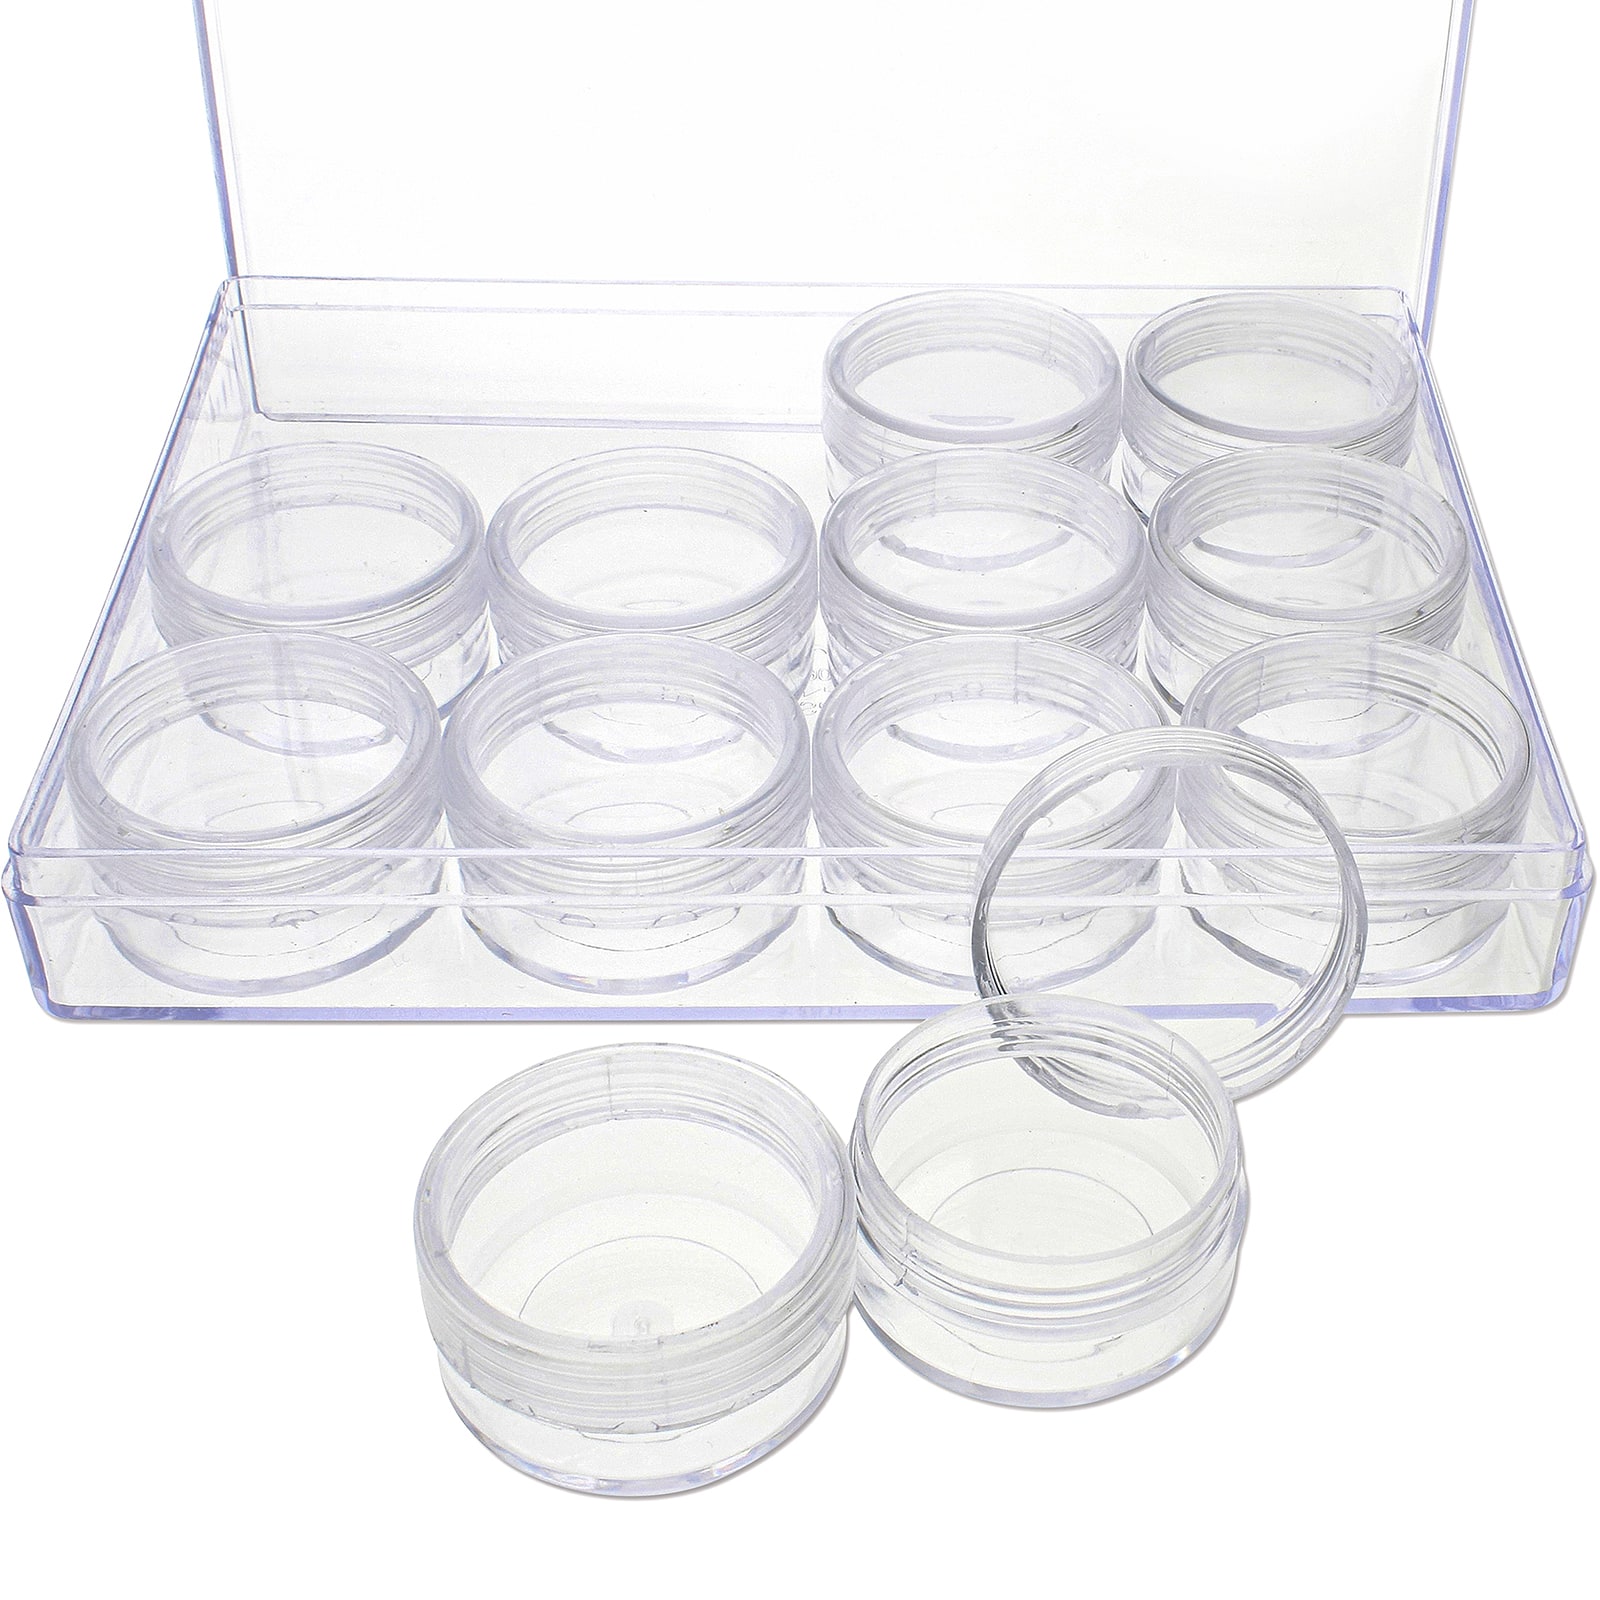 5 x Clear Kitchen Storage Canisters